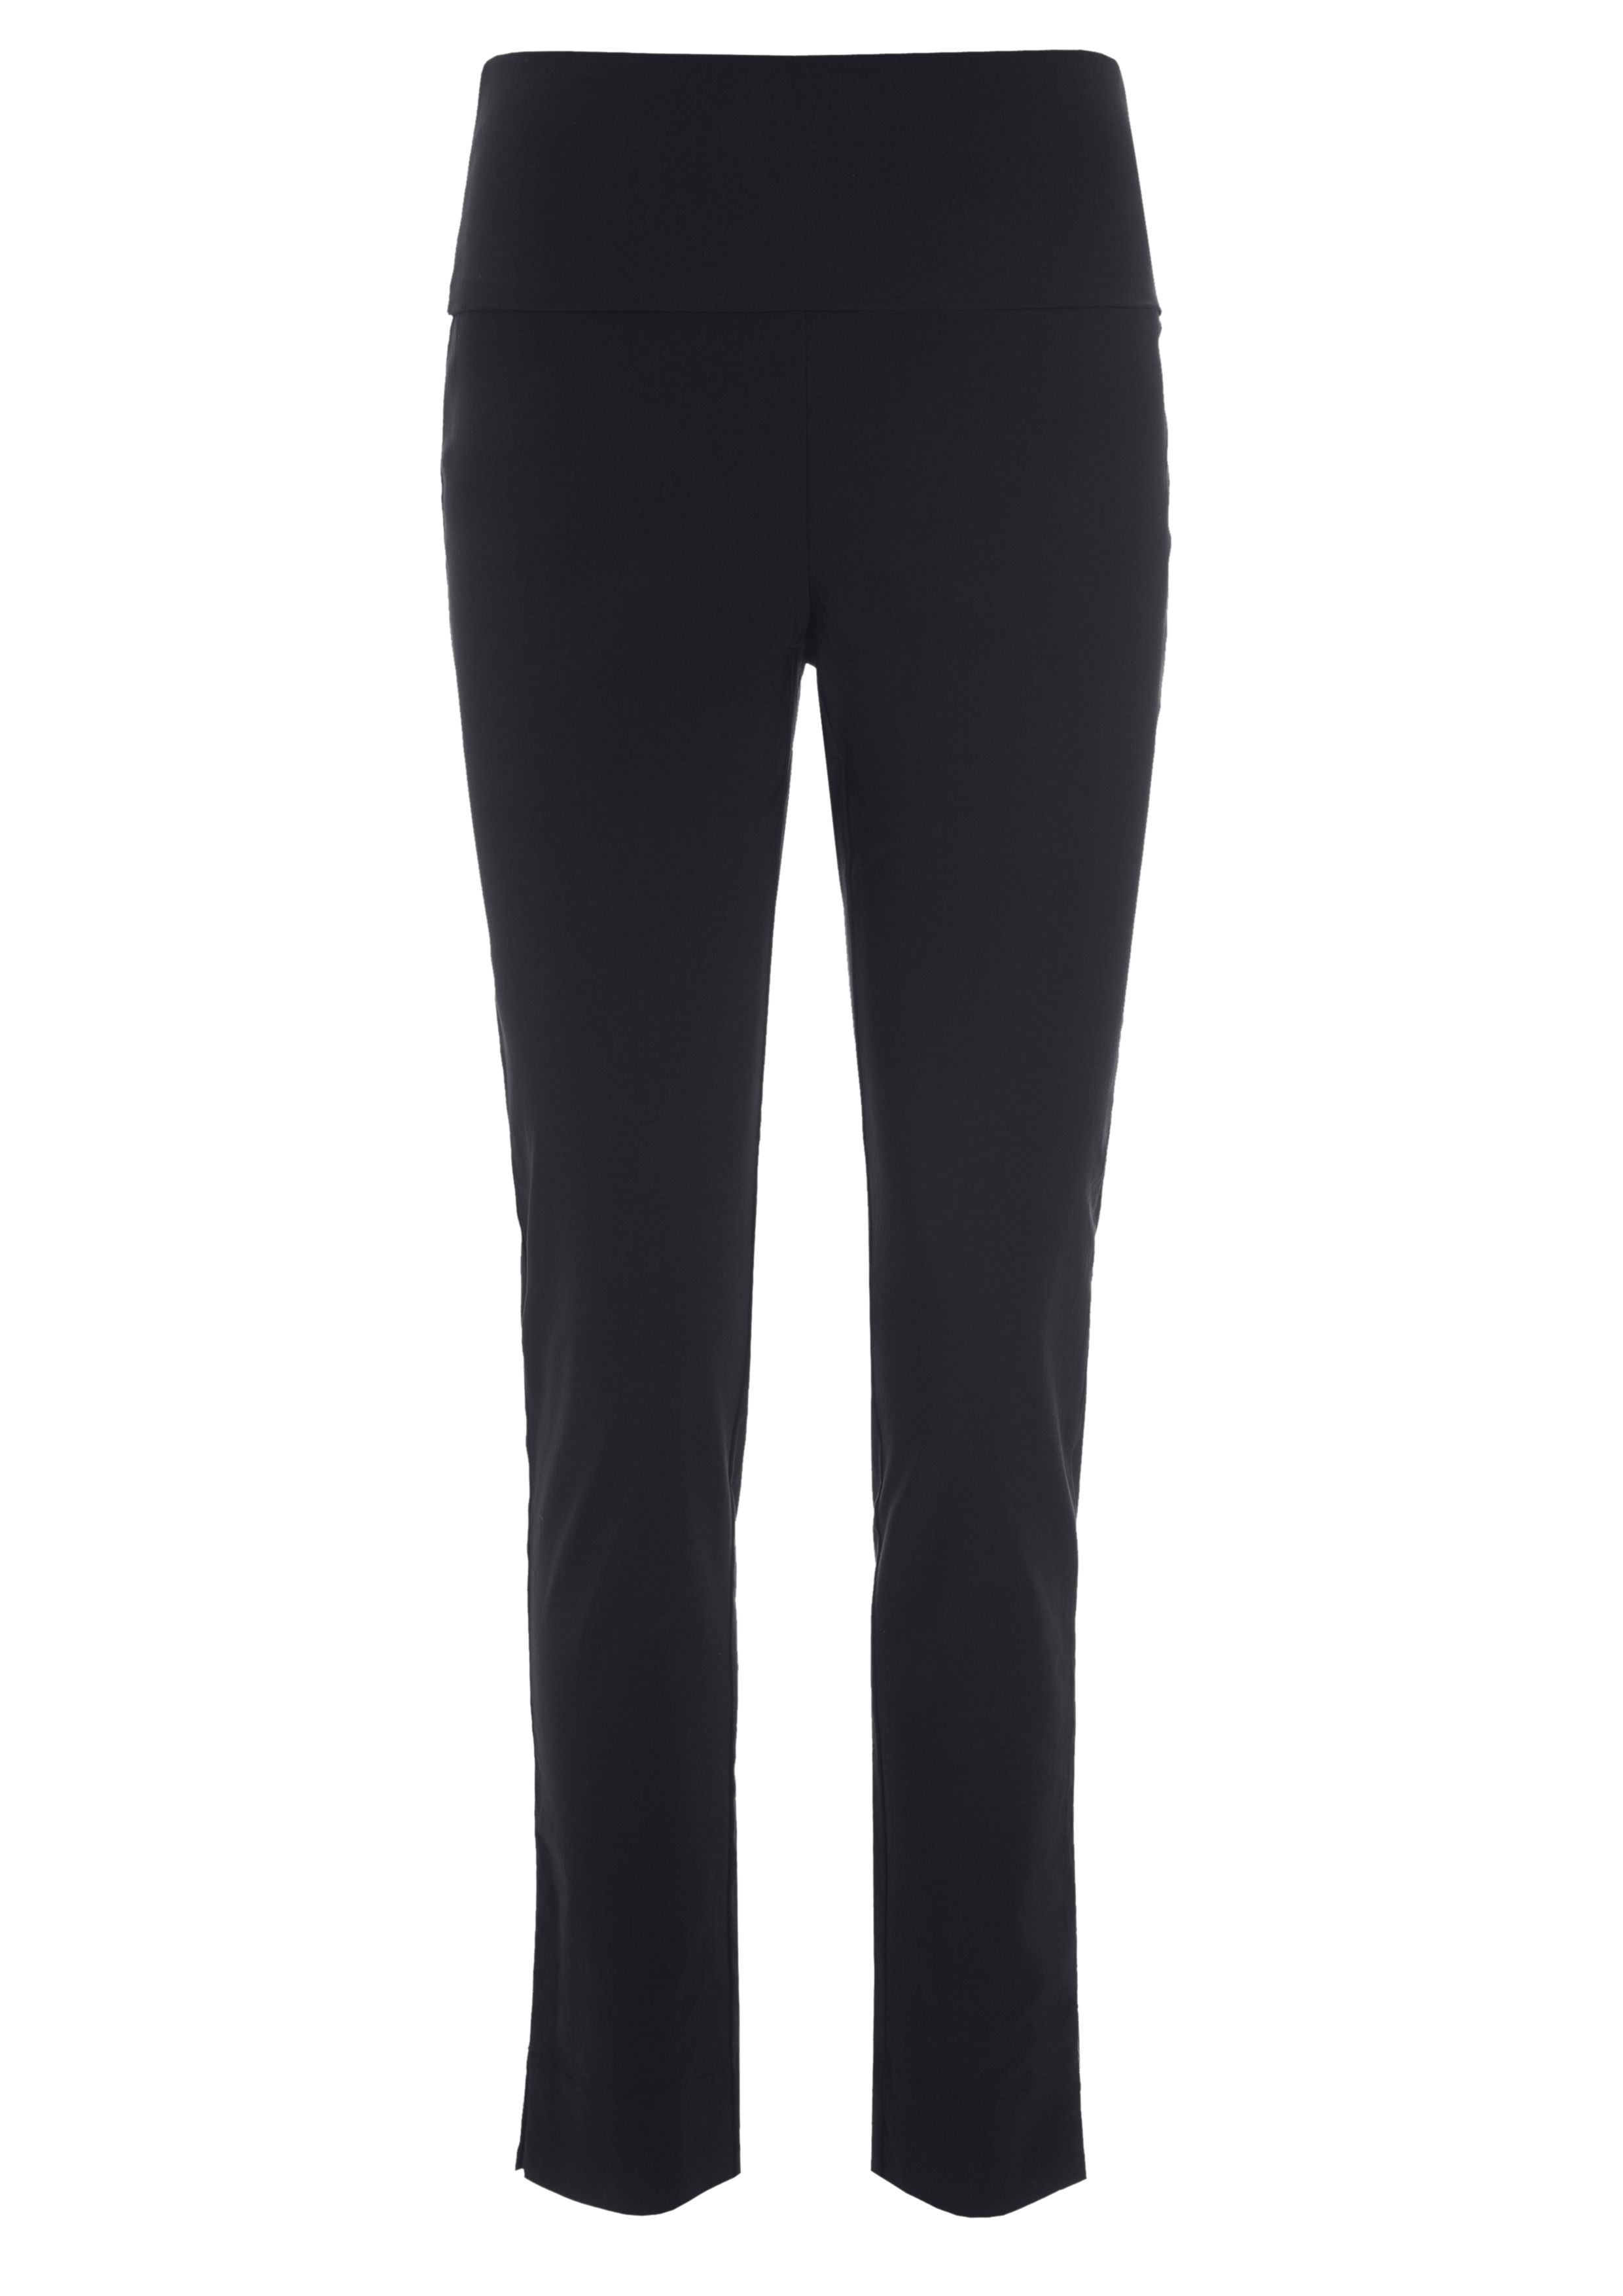 Magic stretch trousers with slits b length